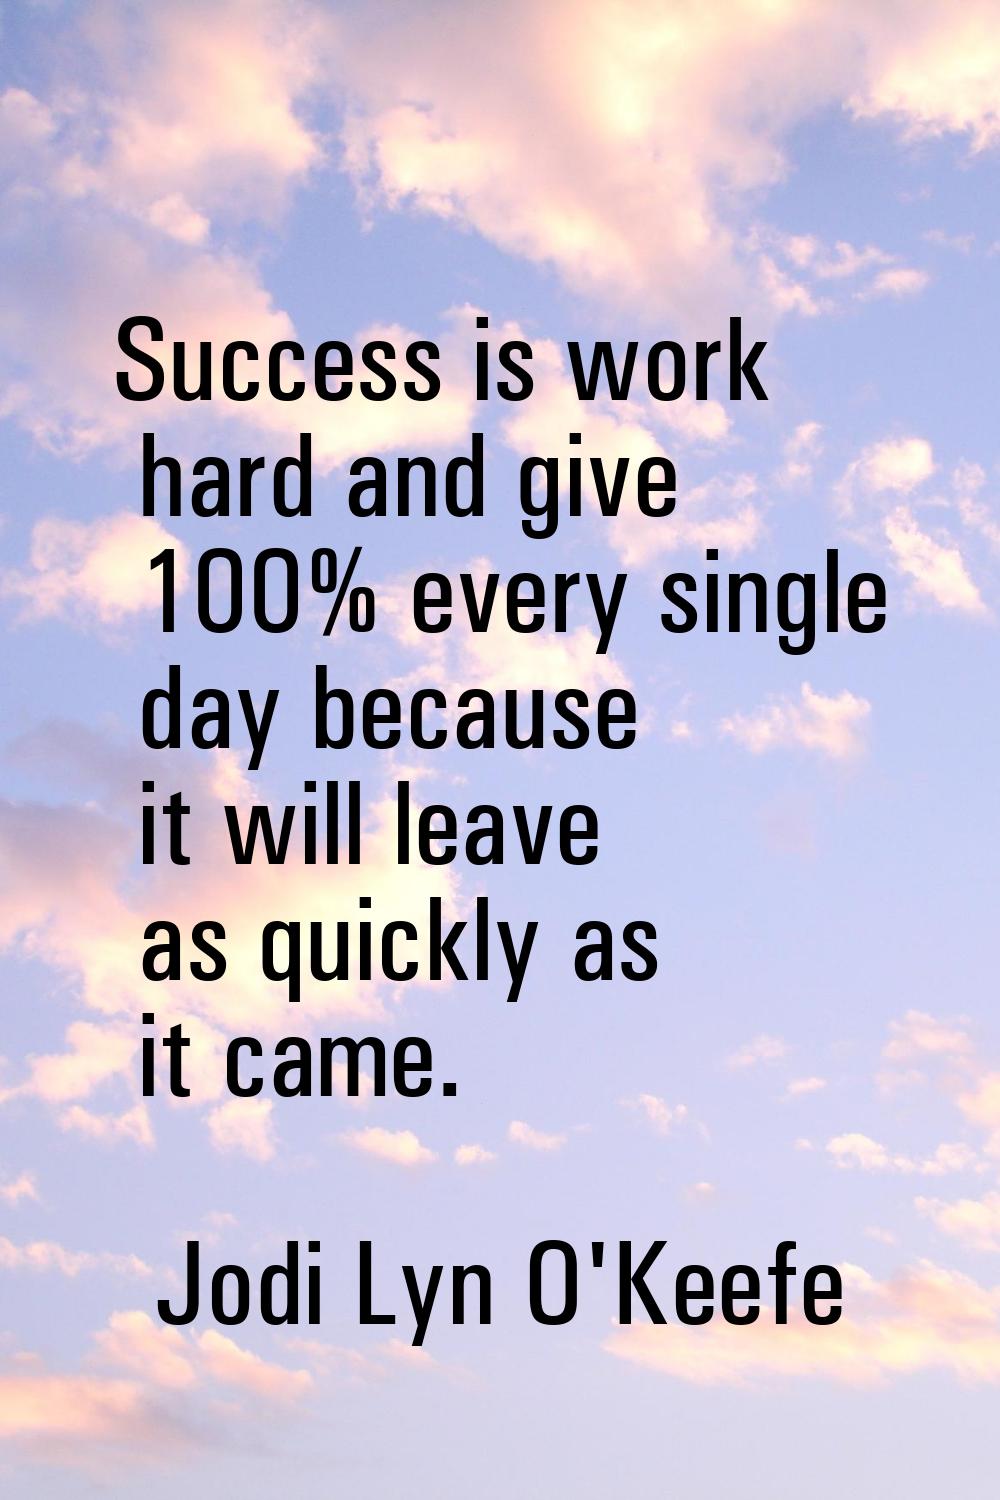 Success is work hard and give 100% every single day because it will leave as quickly as it came.